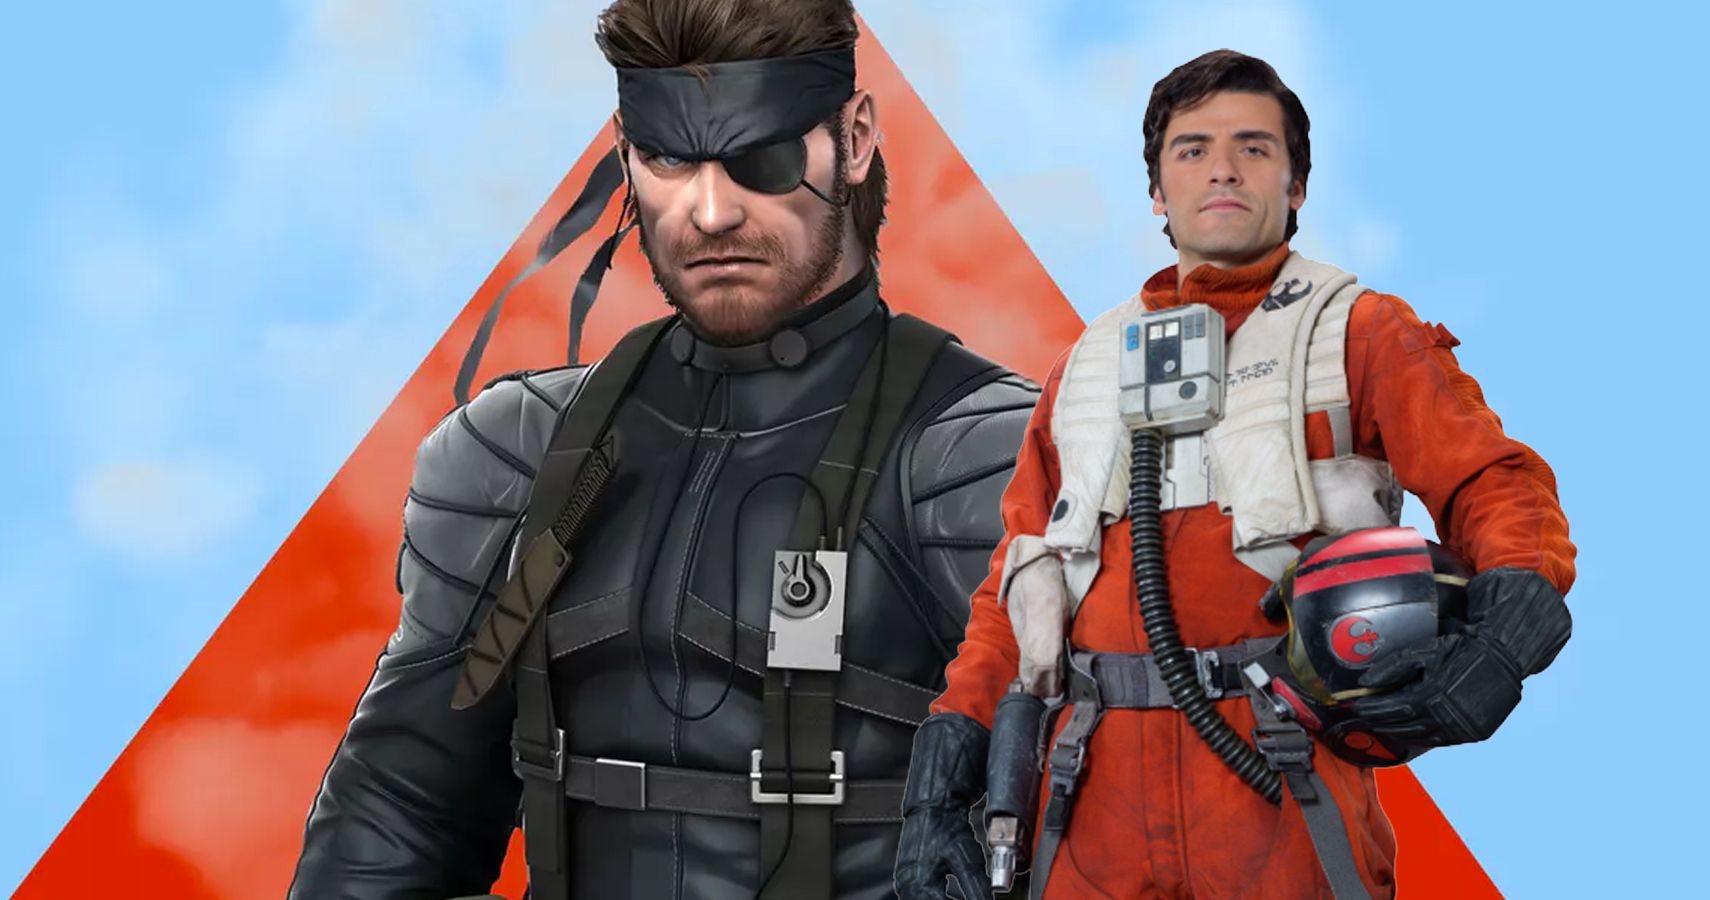 Star Wars Actor Wants To Play The MovieVersion Of Solid Snake From Metal Gear Solid